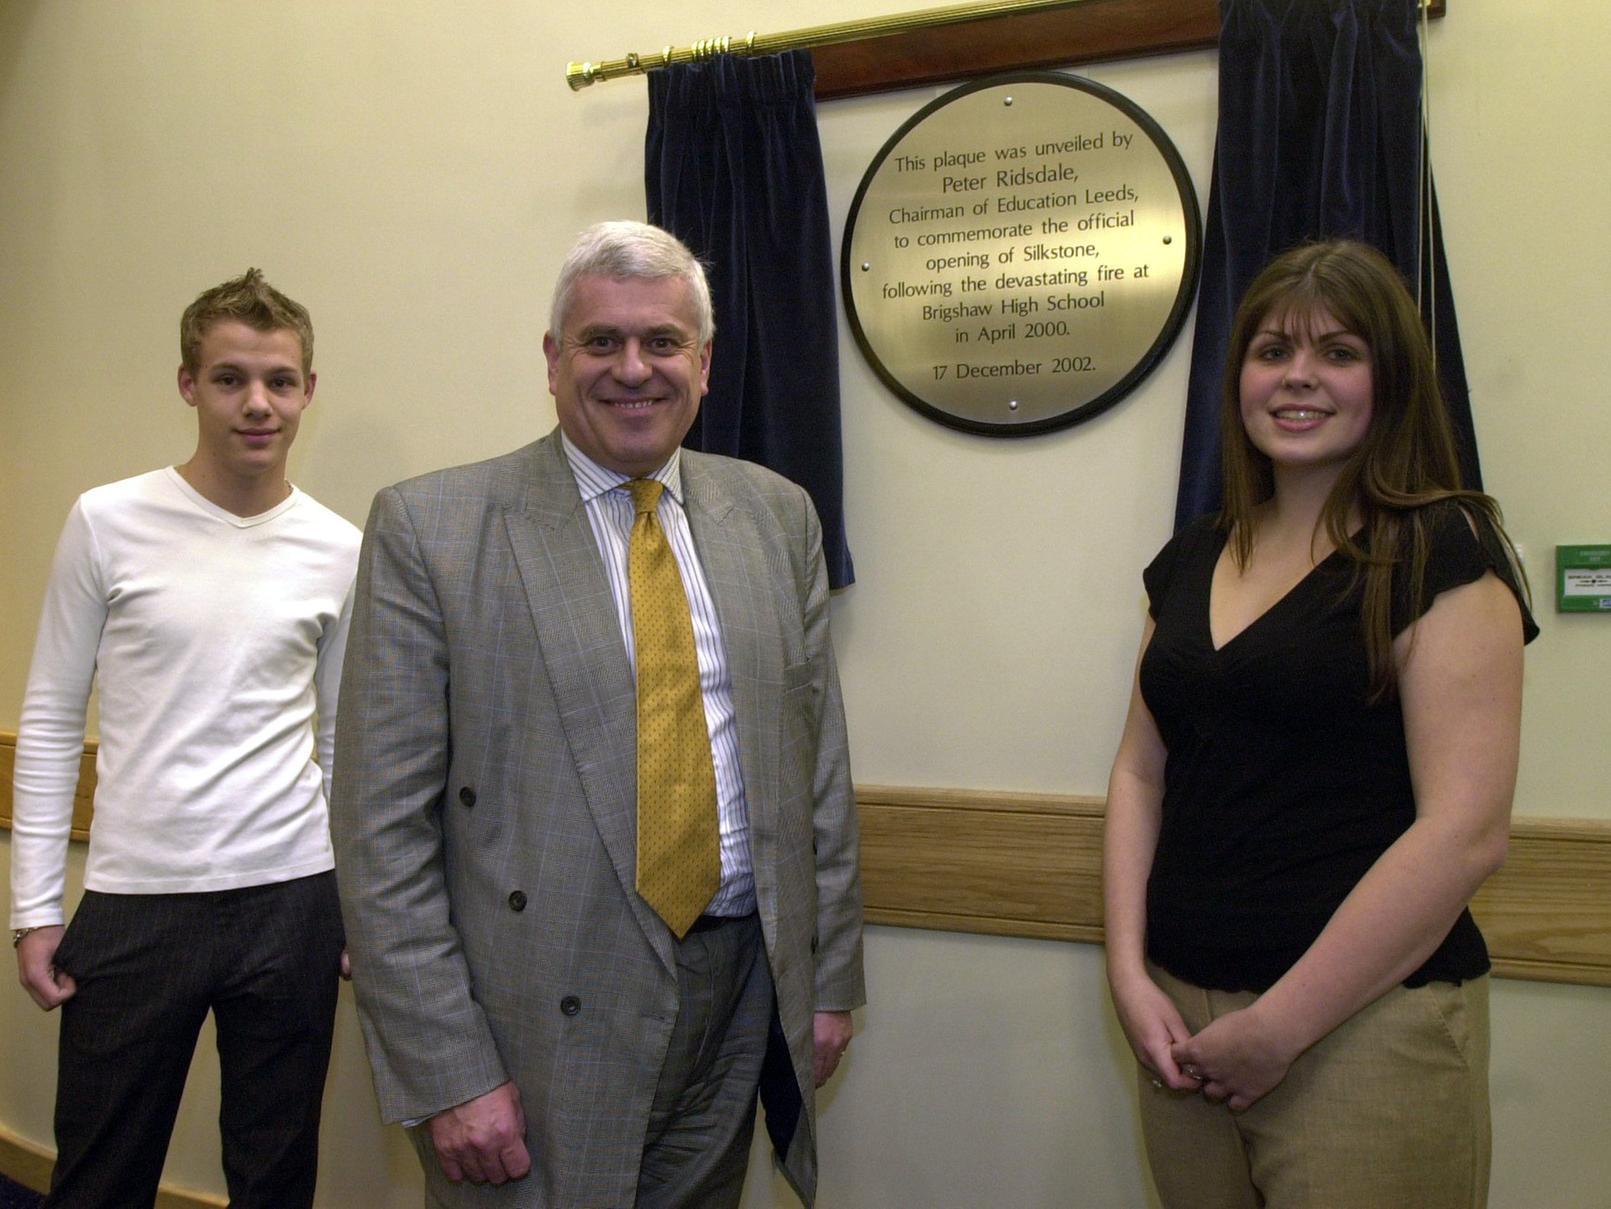 Chairman of Education Leeds, Peter Ridsdale opened the new multi million pound school building at Brigshaw High. He is pictured with pupils Charlotte Orr and Matt Hill.